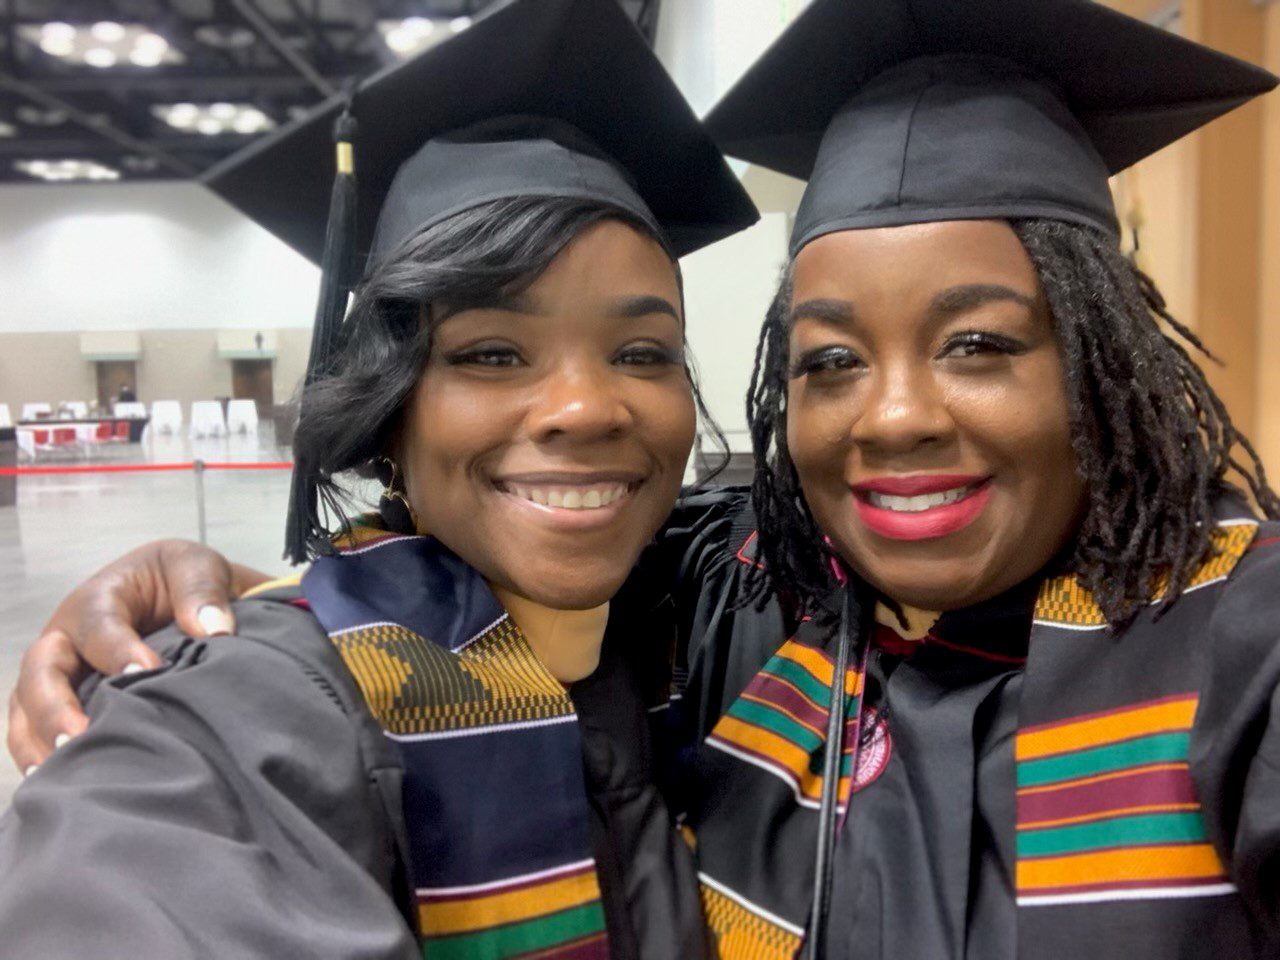 Two women wearing graduation caps and scarves.